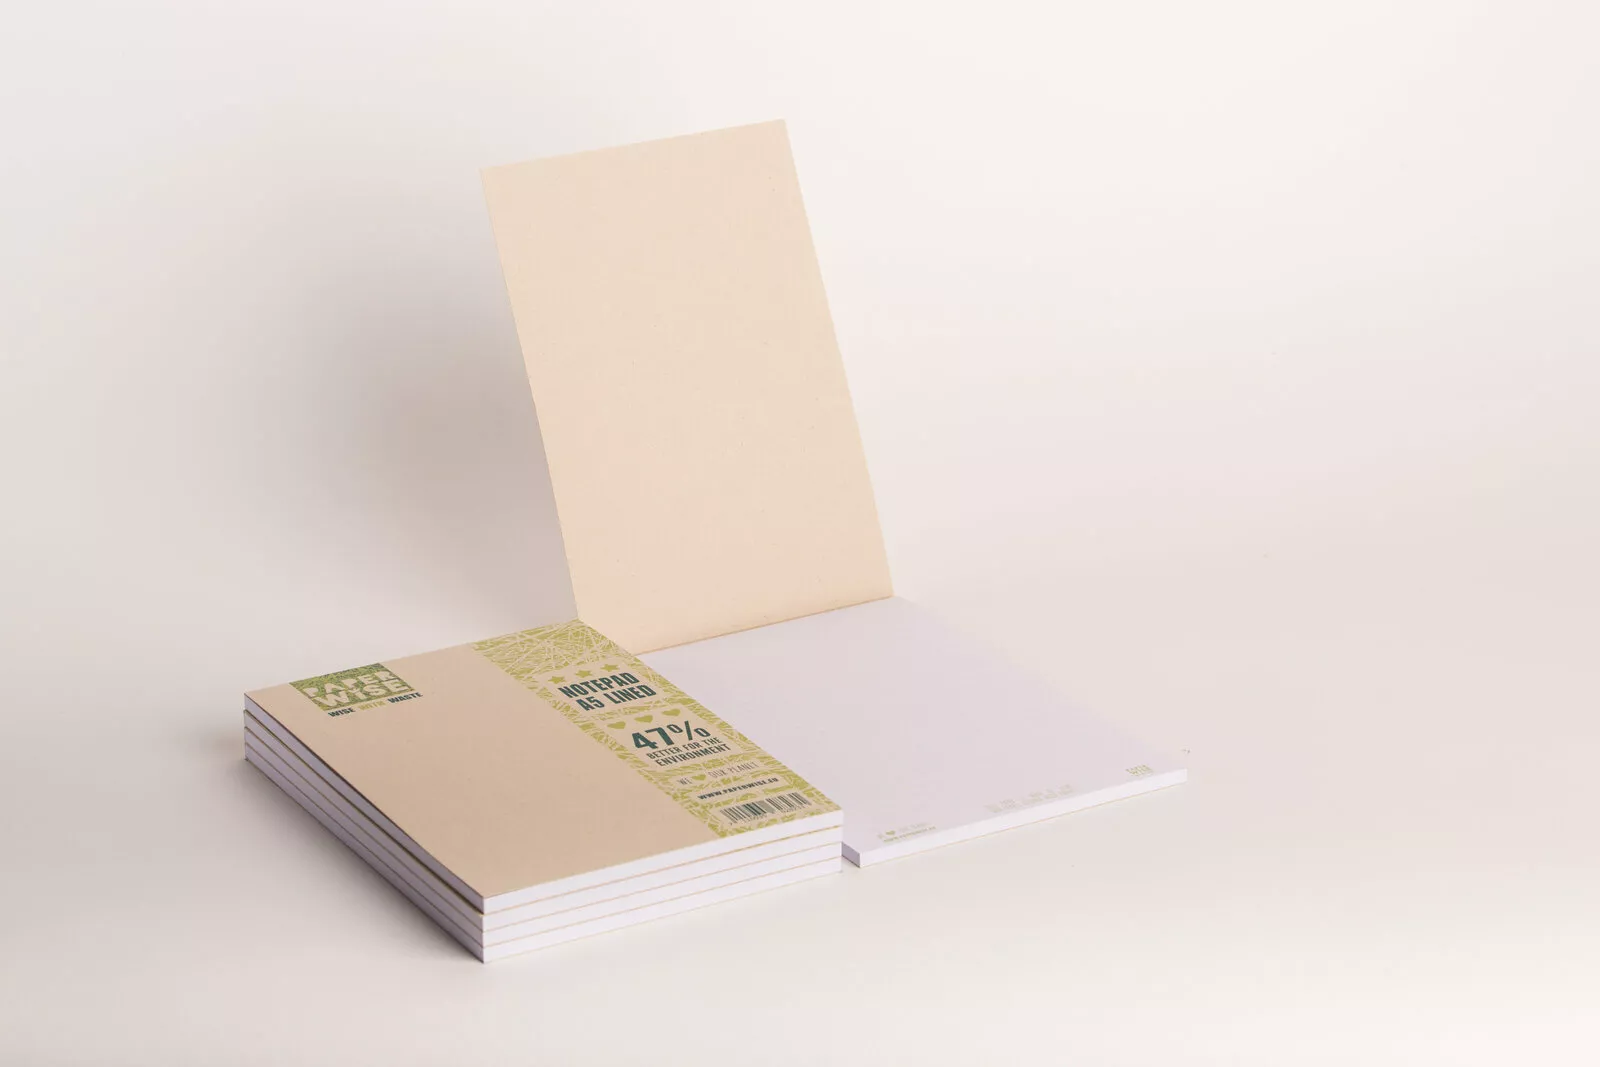 PaperWise sustainable paper notebooks A5 unbleached white eco stationery organic writing pad office